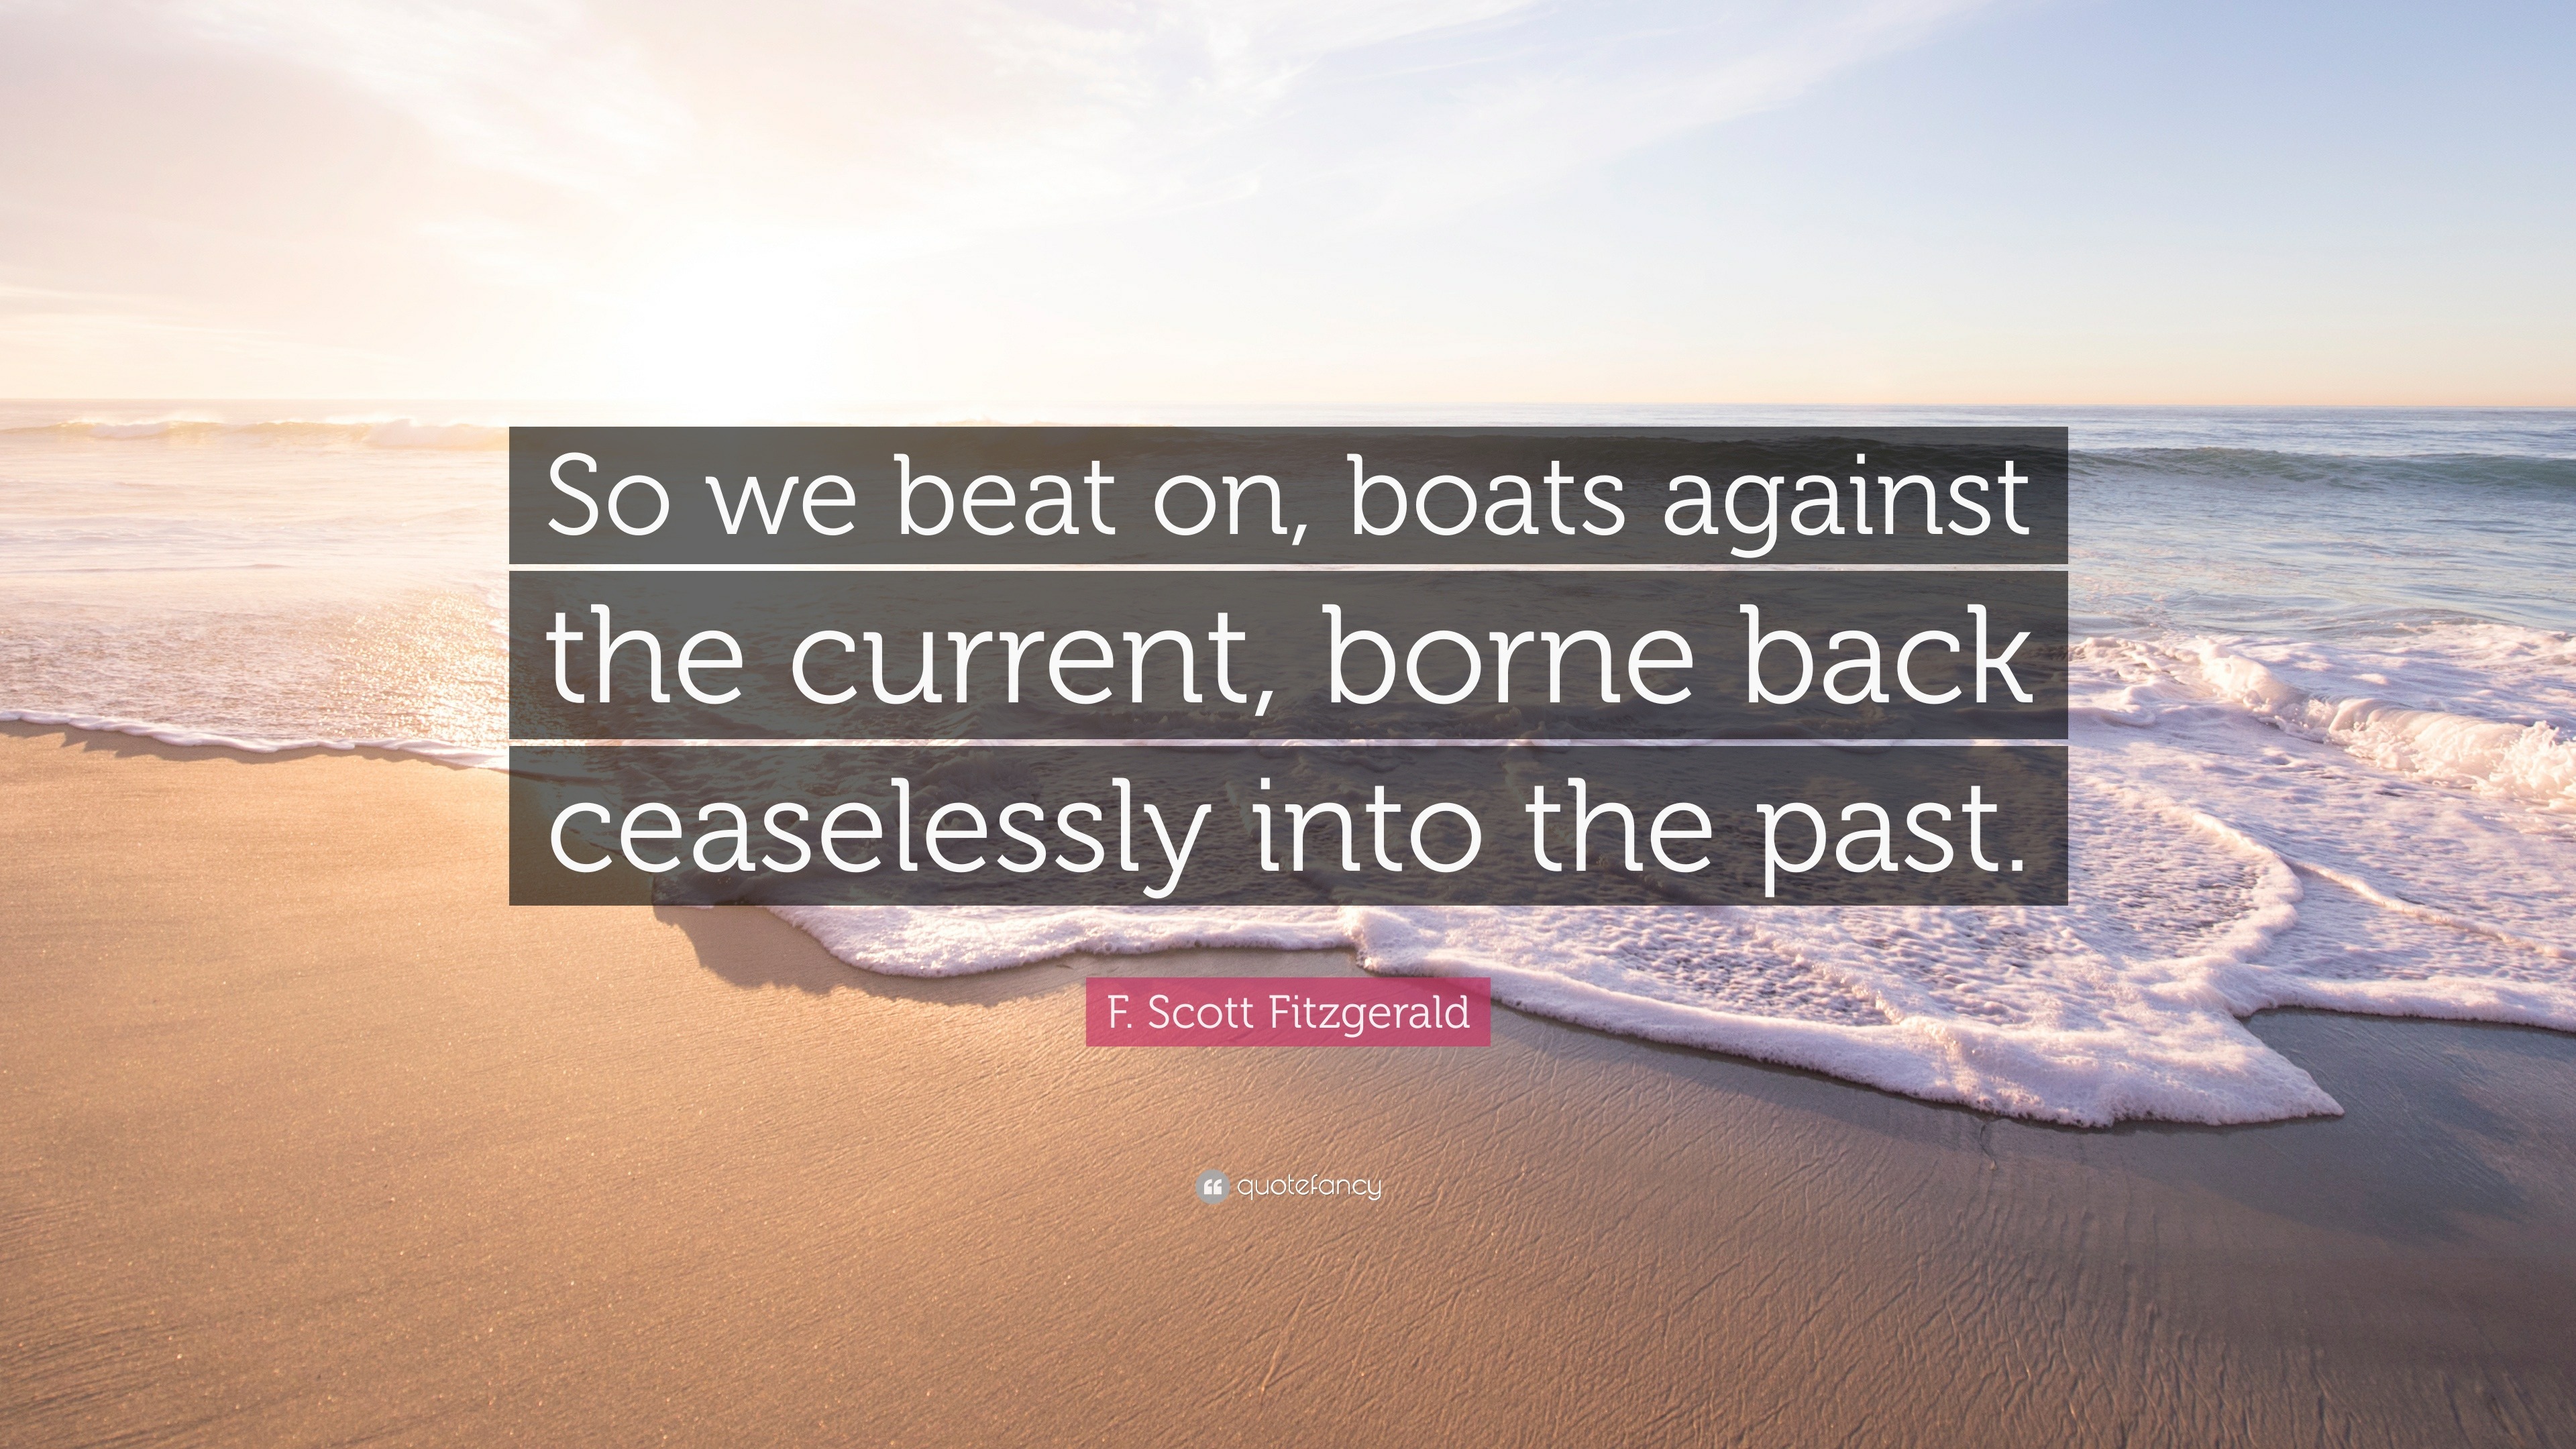 F. Scott Fitzgerald Quote: “So We Beat On, Boats Against The Current, Borne Back Ceaselessly Into